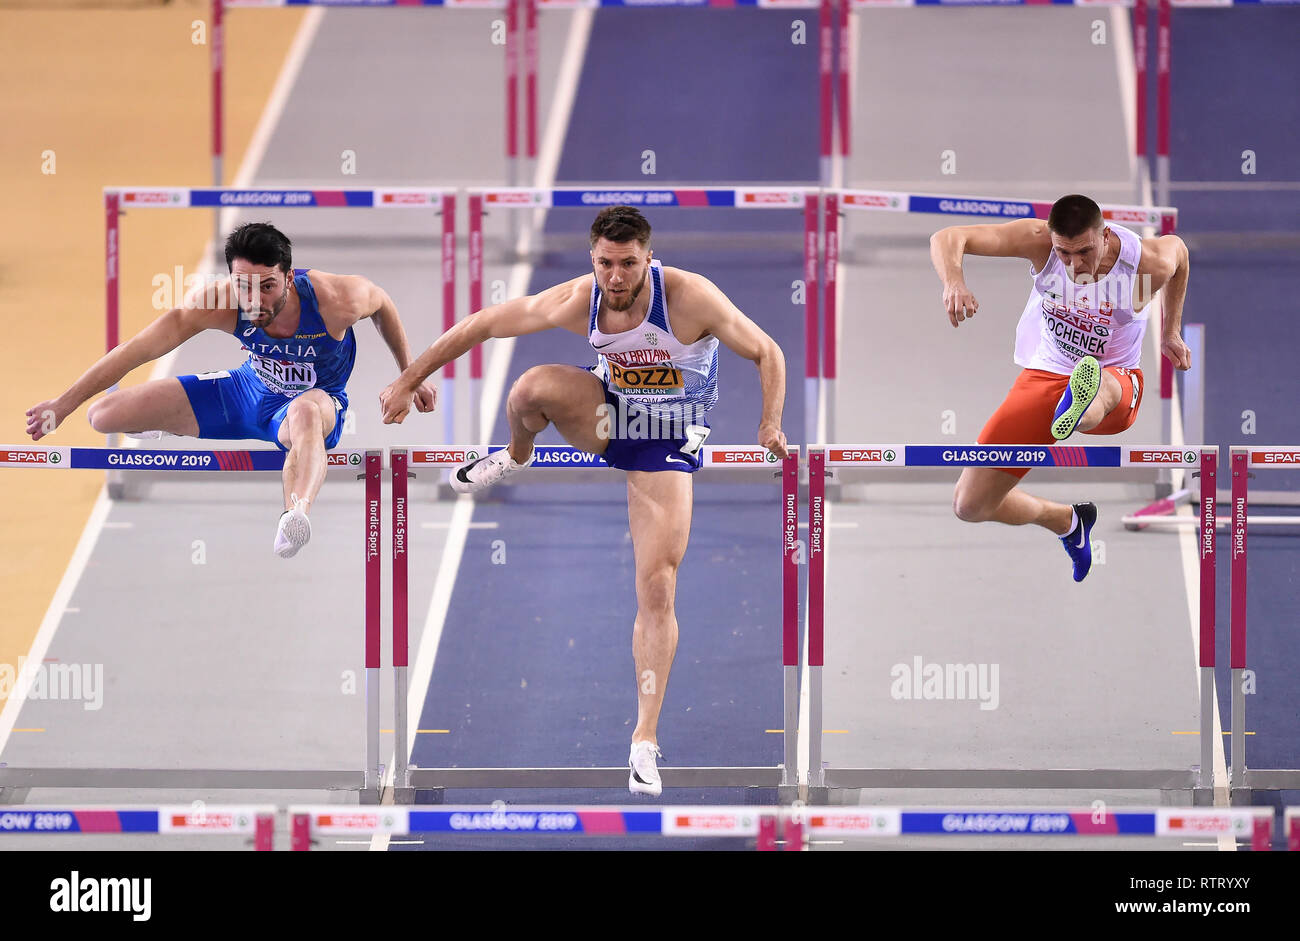 Great Britain's Andy Pozzi (centre) Italy's Lorenzo Perini and Poland's Dominik Bochenek competing in Heat 1 of the Men's 60m hurdles event during day two of the European Indoor Athletics Championships at the Emirates Arena, Glasgow. Stock Photo